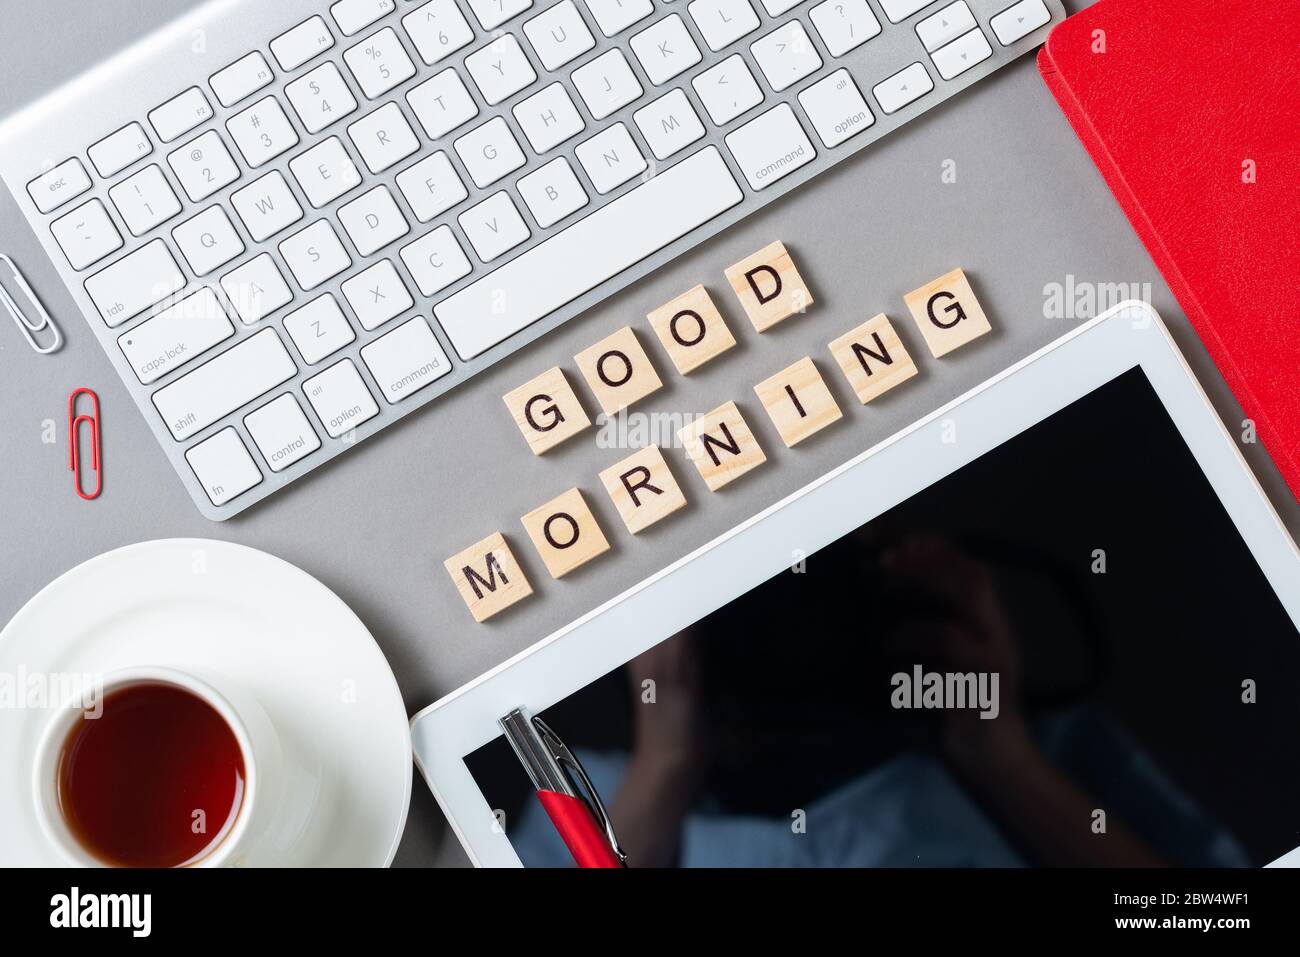 Good morning message with letters on cubes Stock Photo